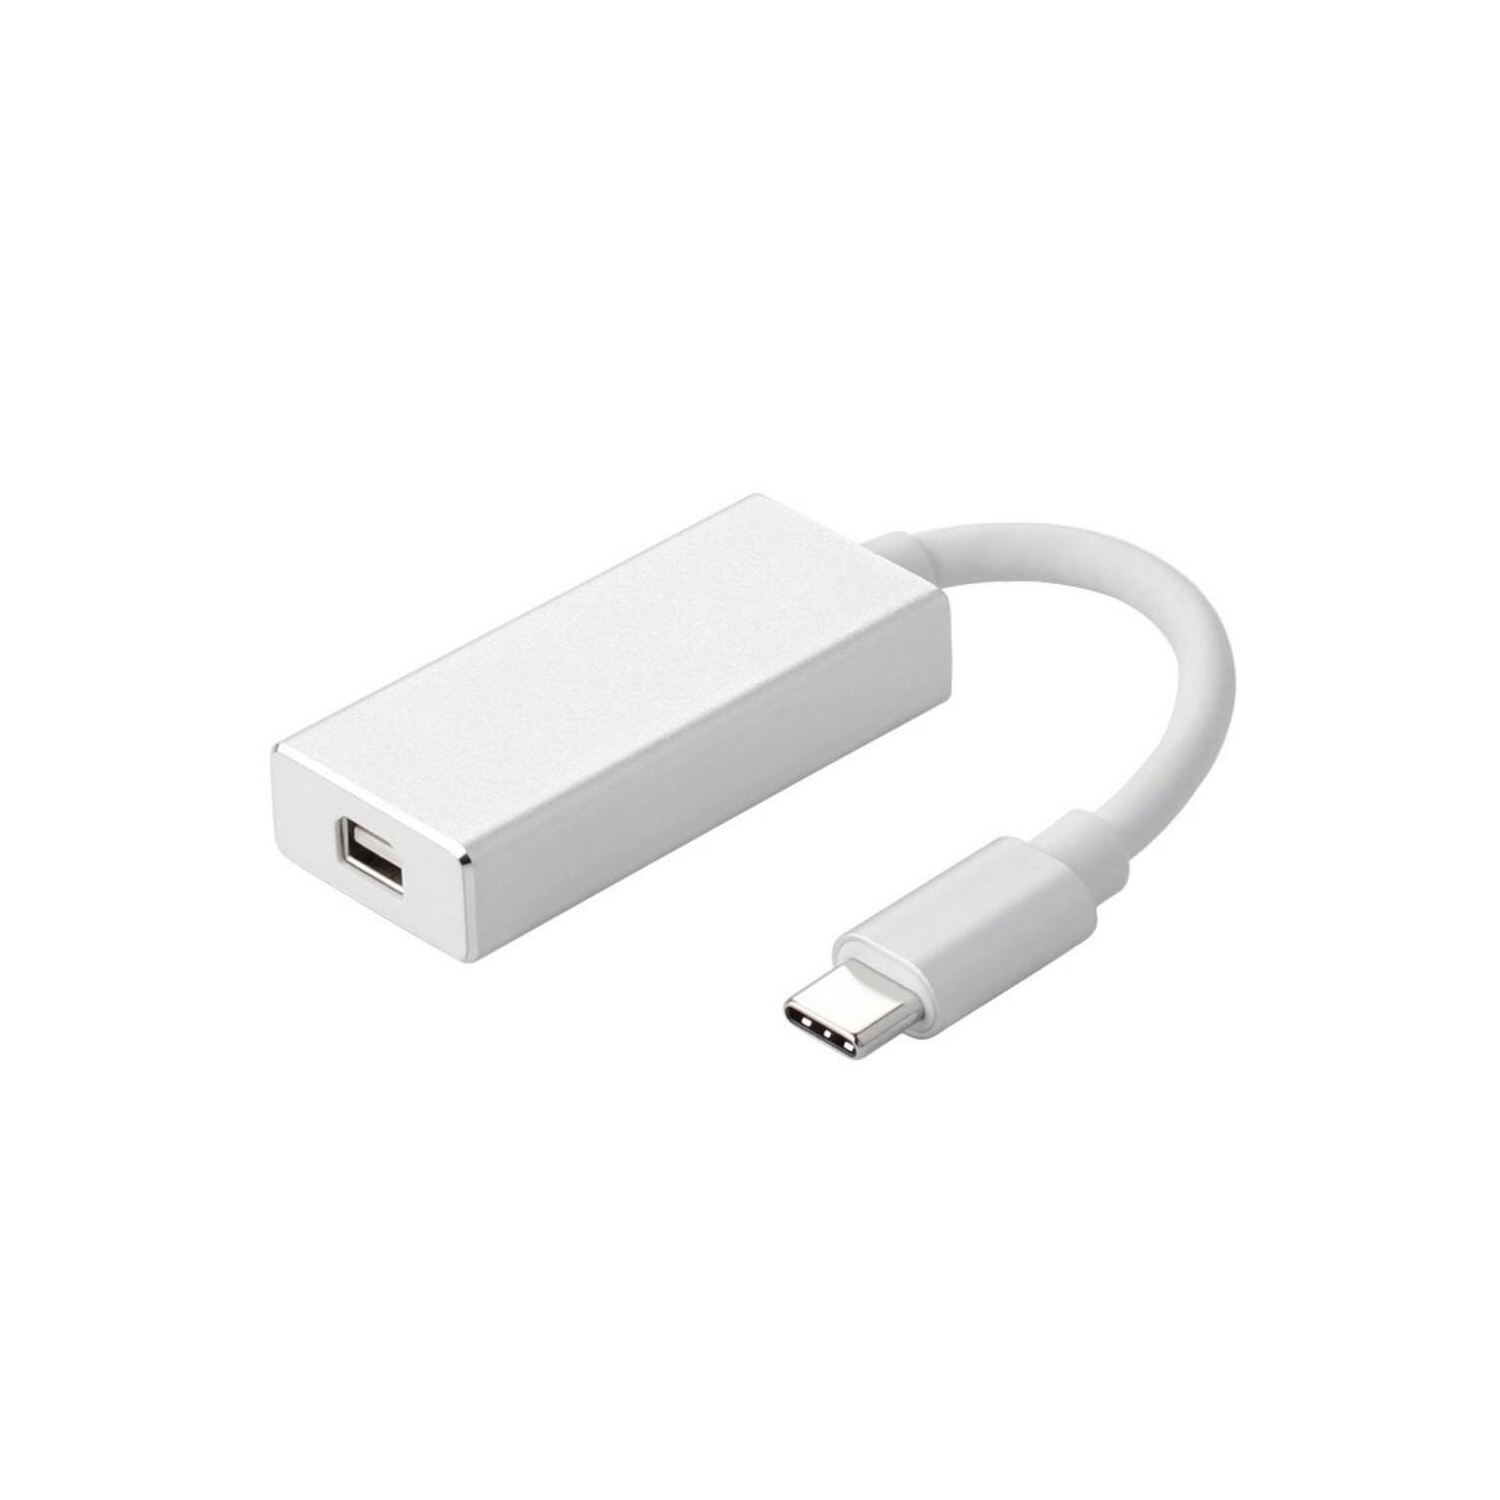 Hyfai USB C Type-C USB 3.1 to Mini Displayport Mini DP MDP Cable Adapter 4K 60Hz Compatible with MacBook, MacBook Pro and More